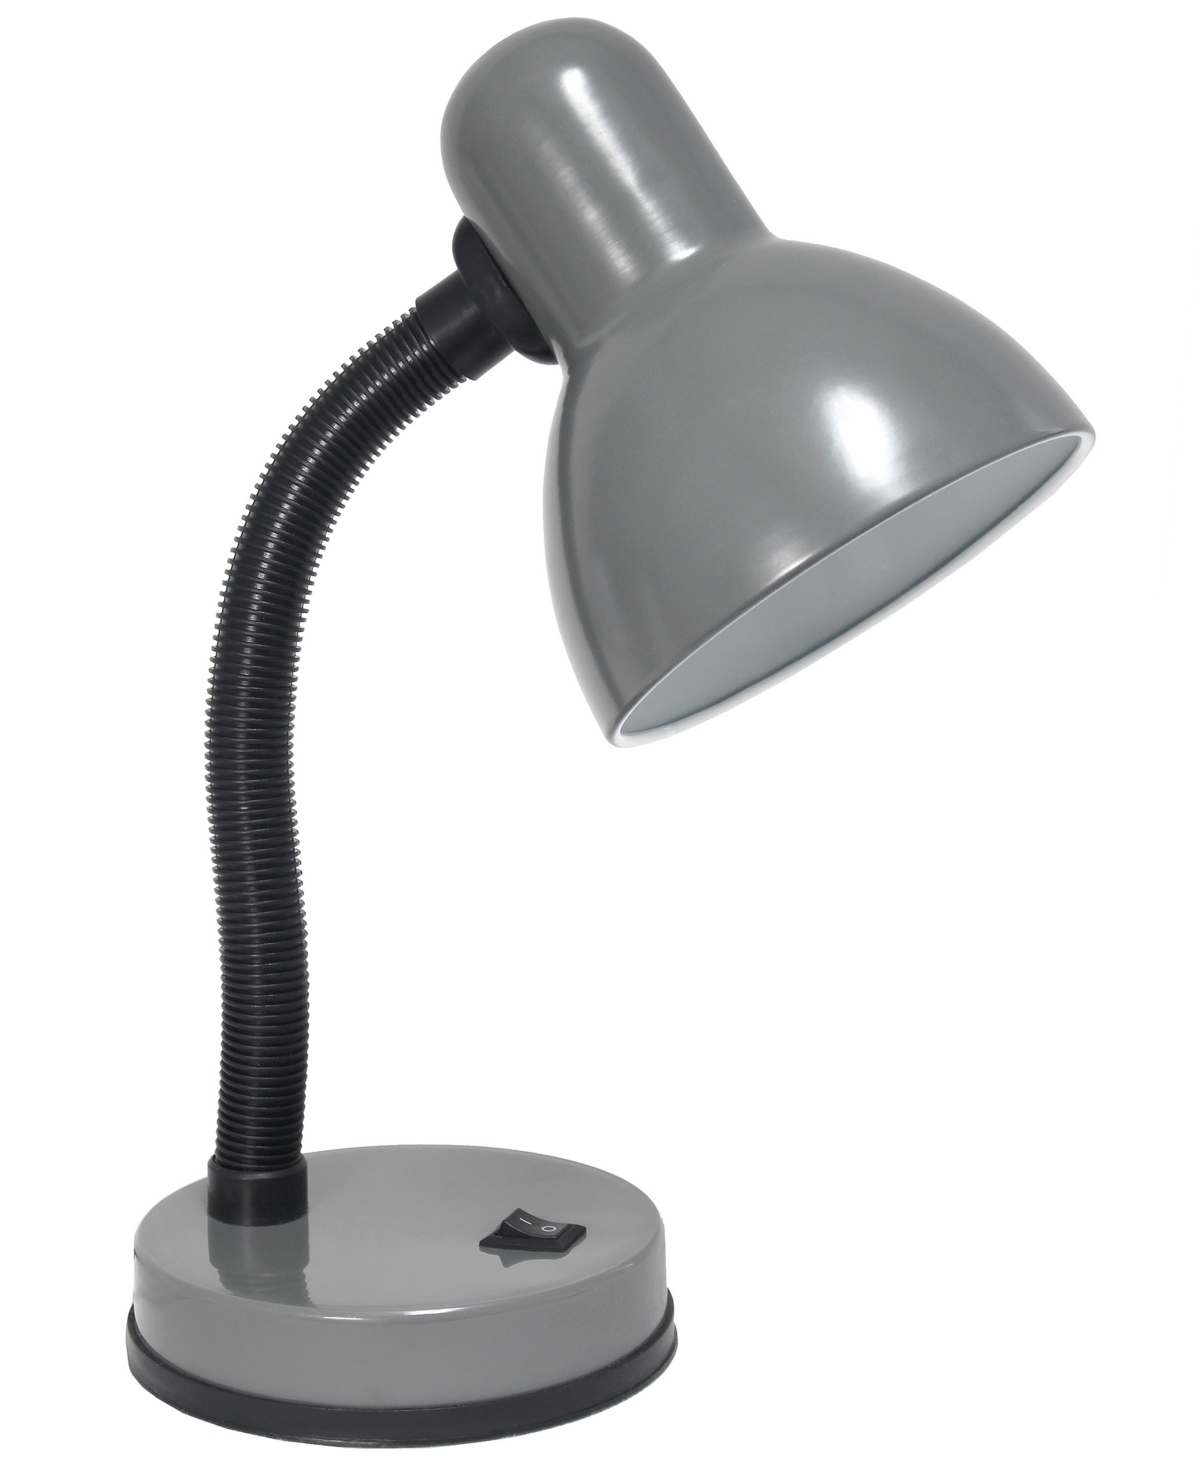 Simple Designs Basic Desk Lamp With Flexible Hose Neck In Gray